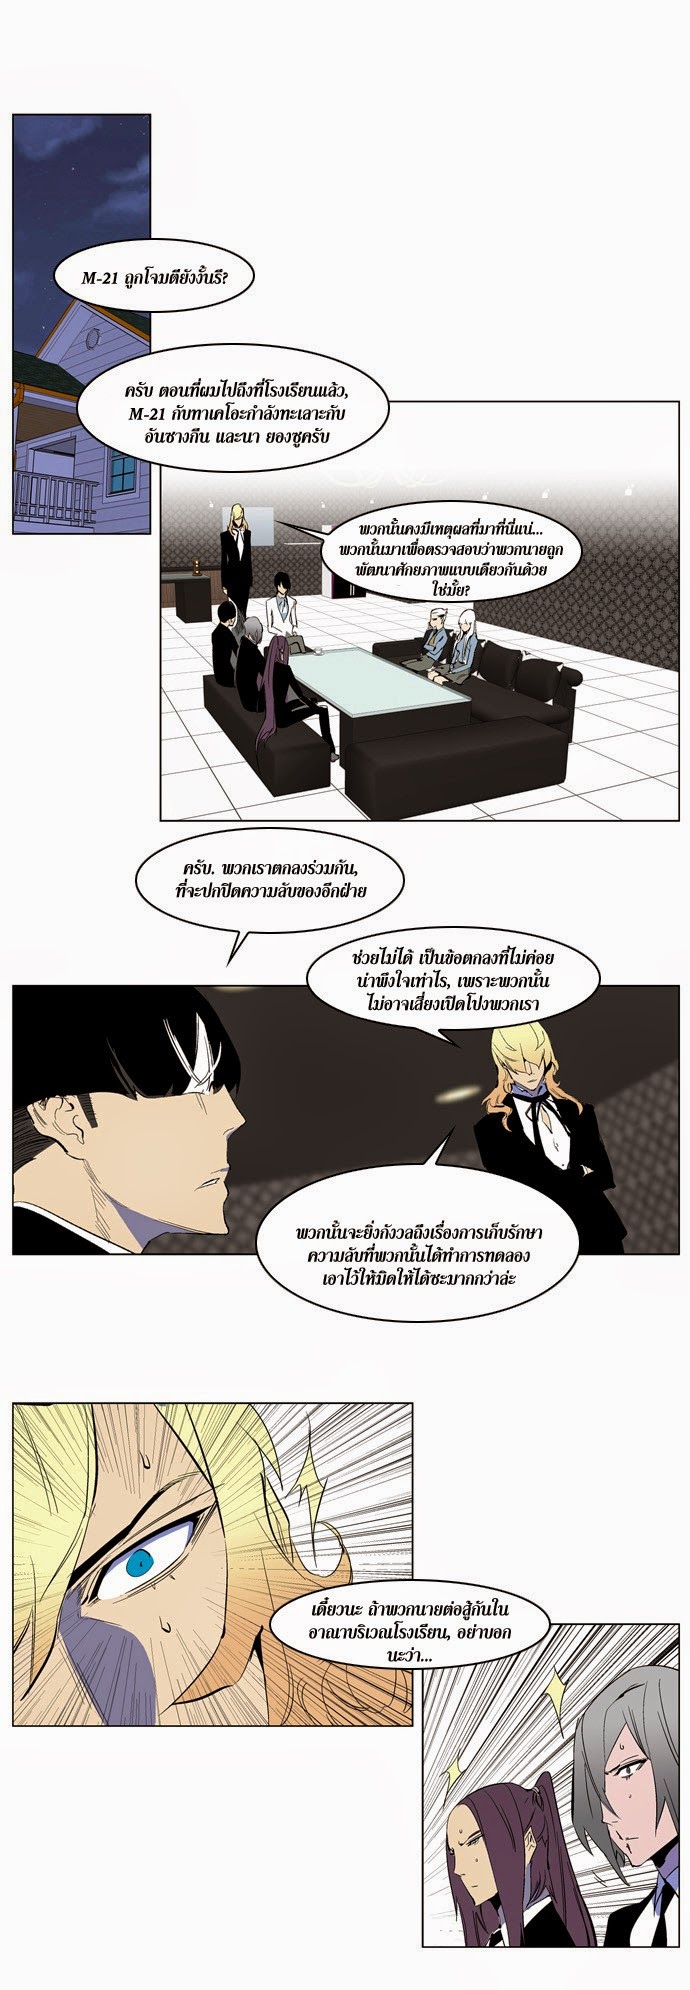 Noblesse 218 020